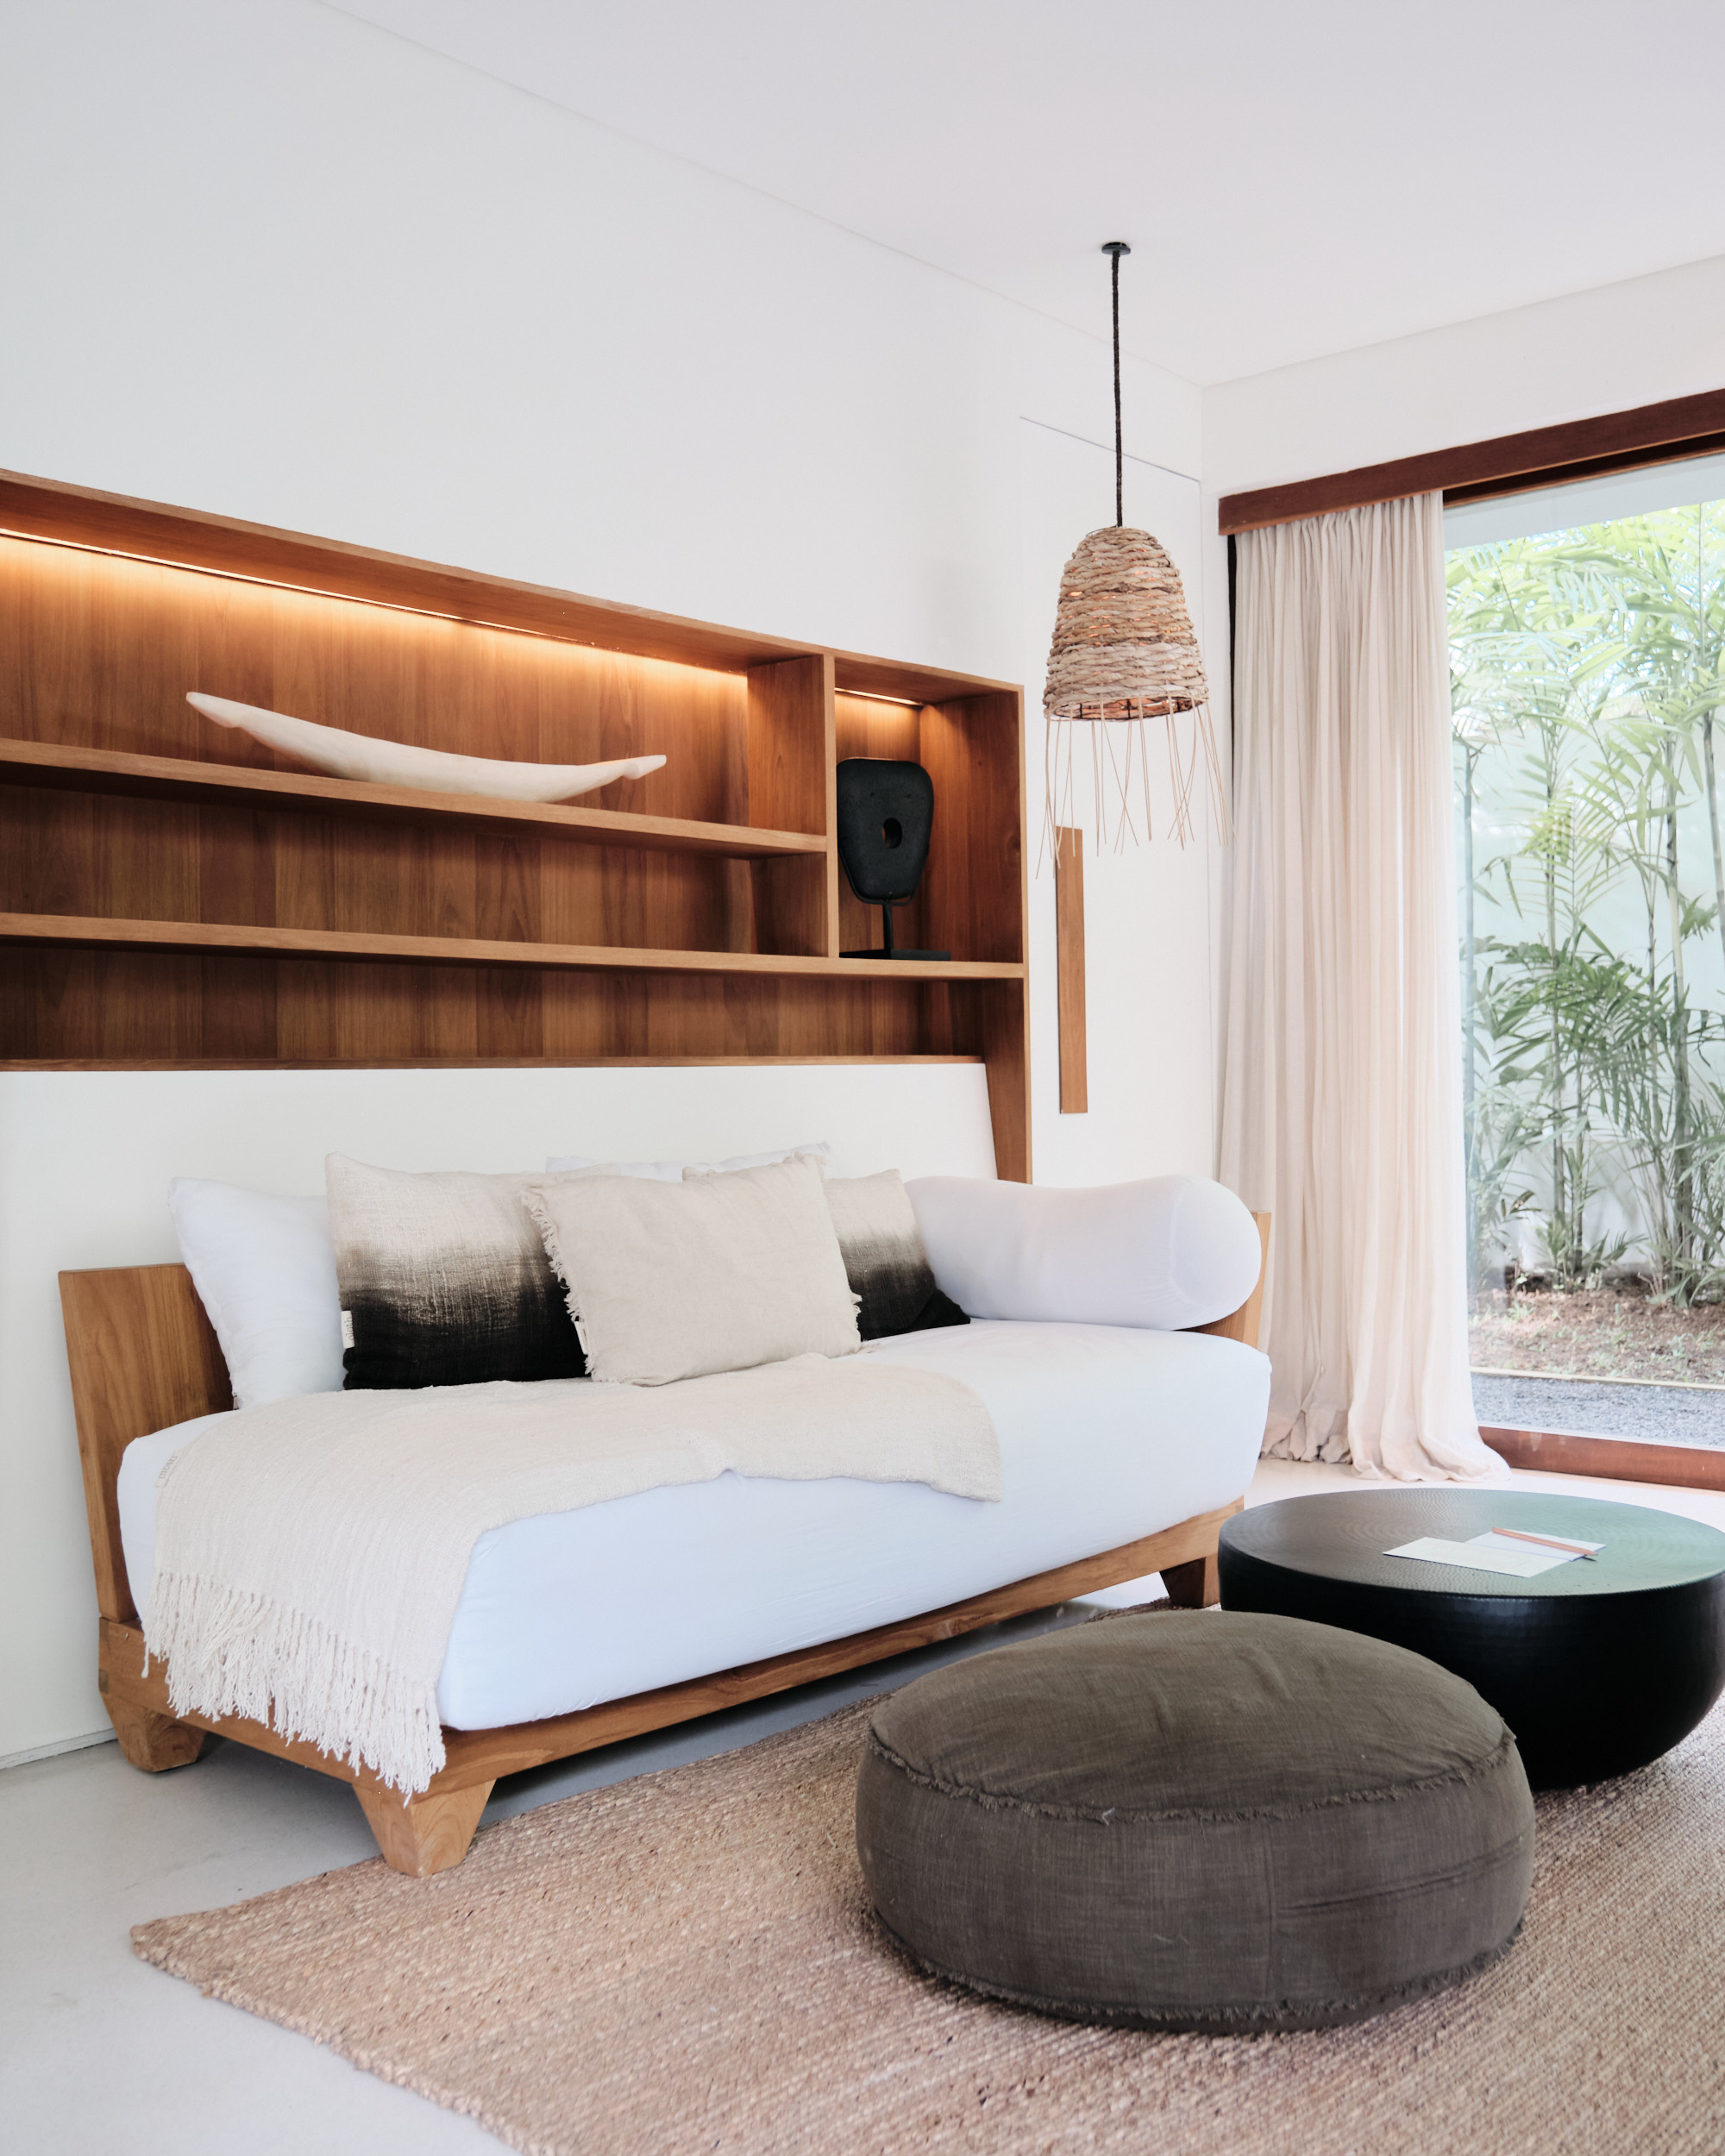 Modern design at Bisma Eight Villas. Hotel review in Ubud Bali by Softer Volumes